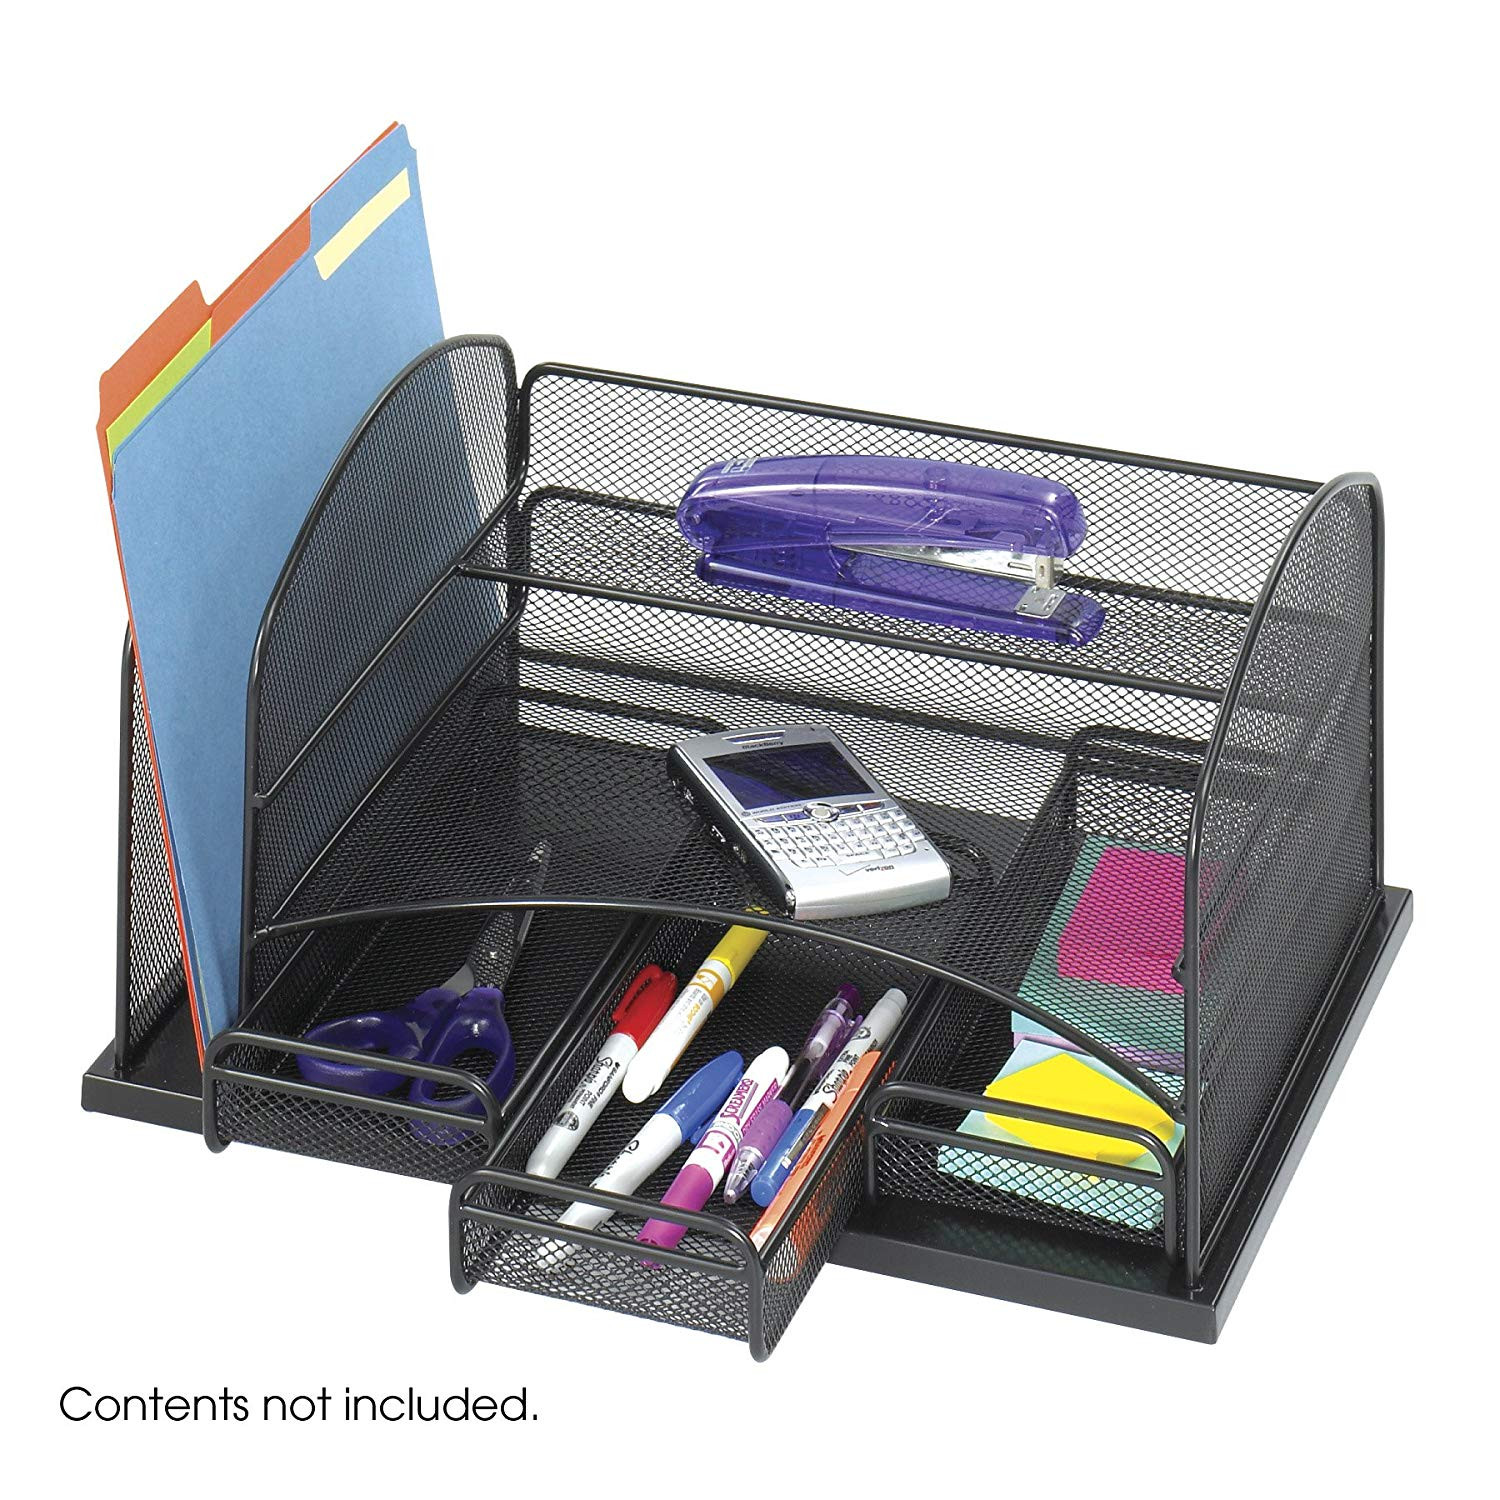 Mesh Desk Organizer
 Safco Products yx Mesh Desk Organizer with 3 Drawers